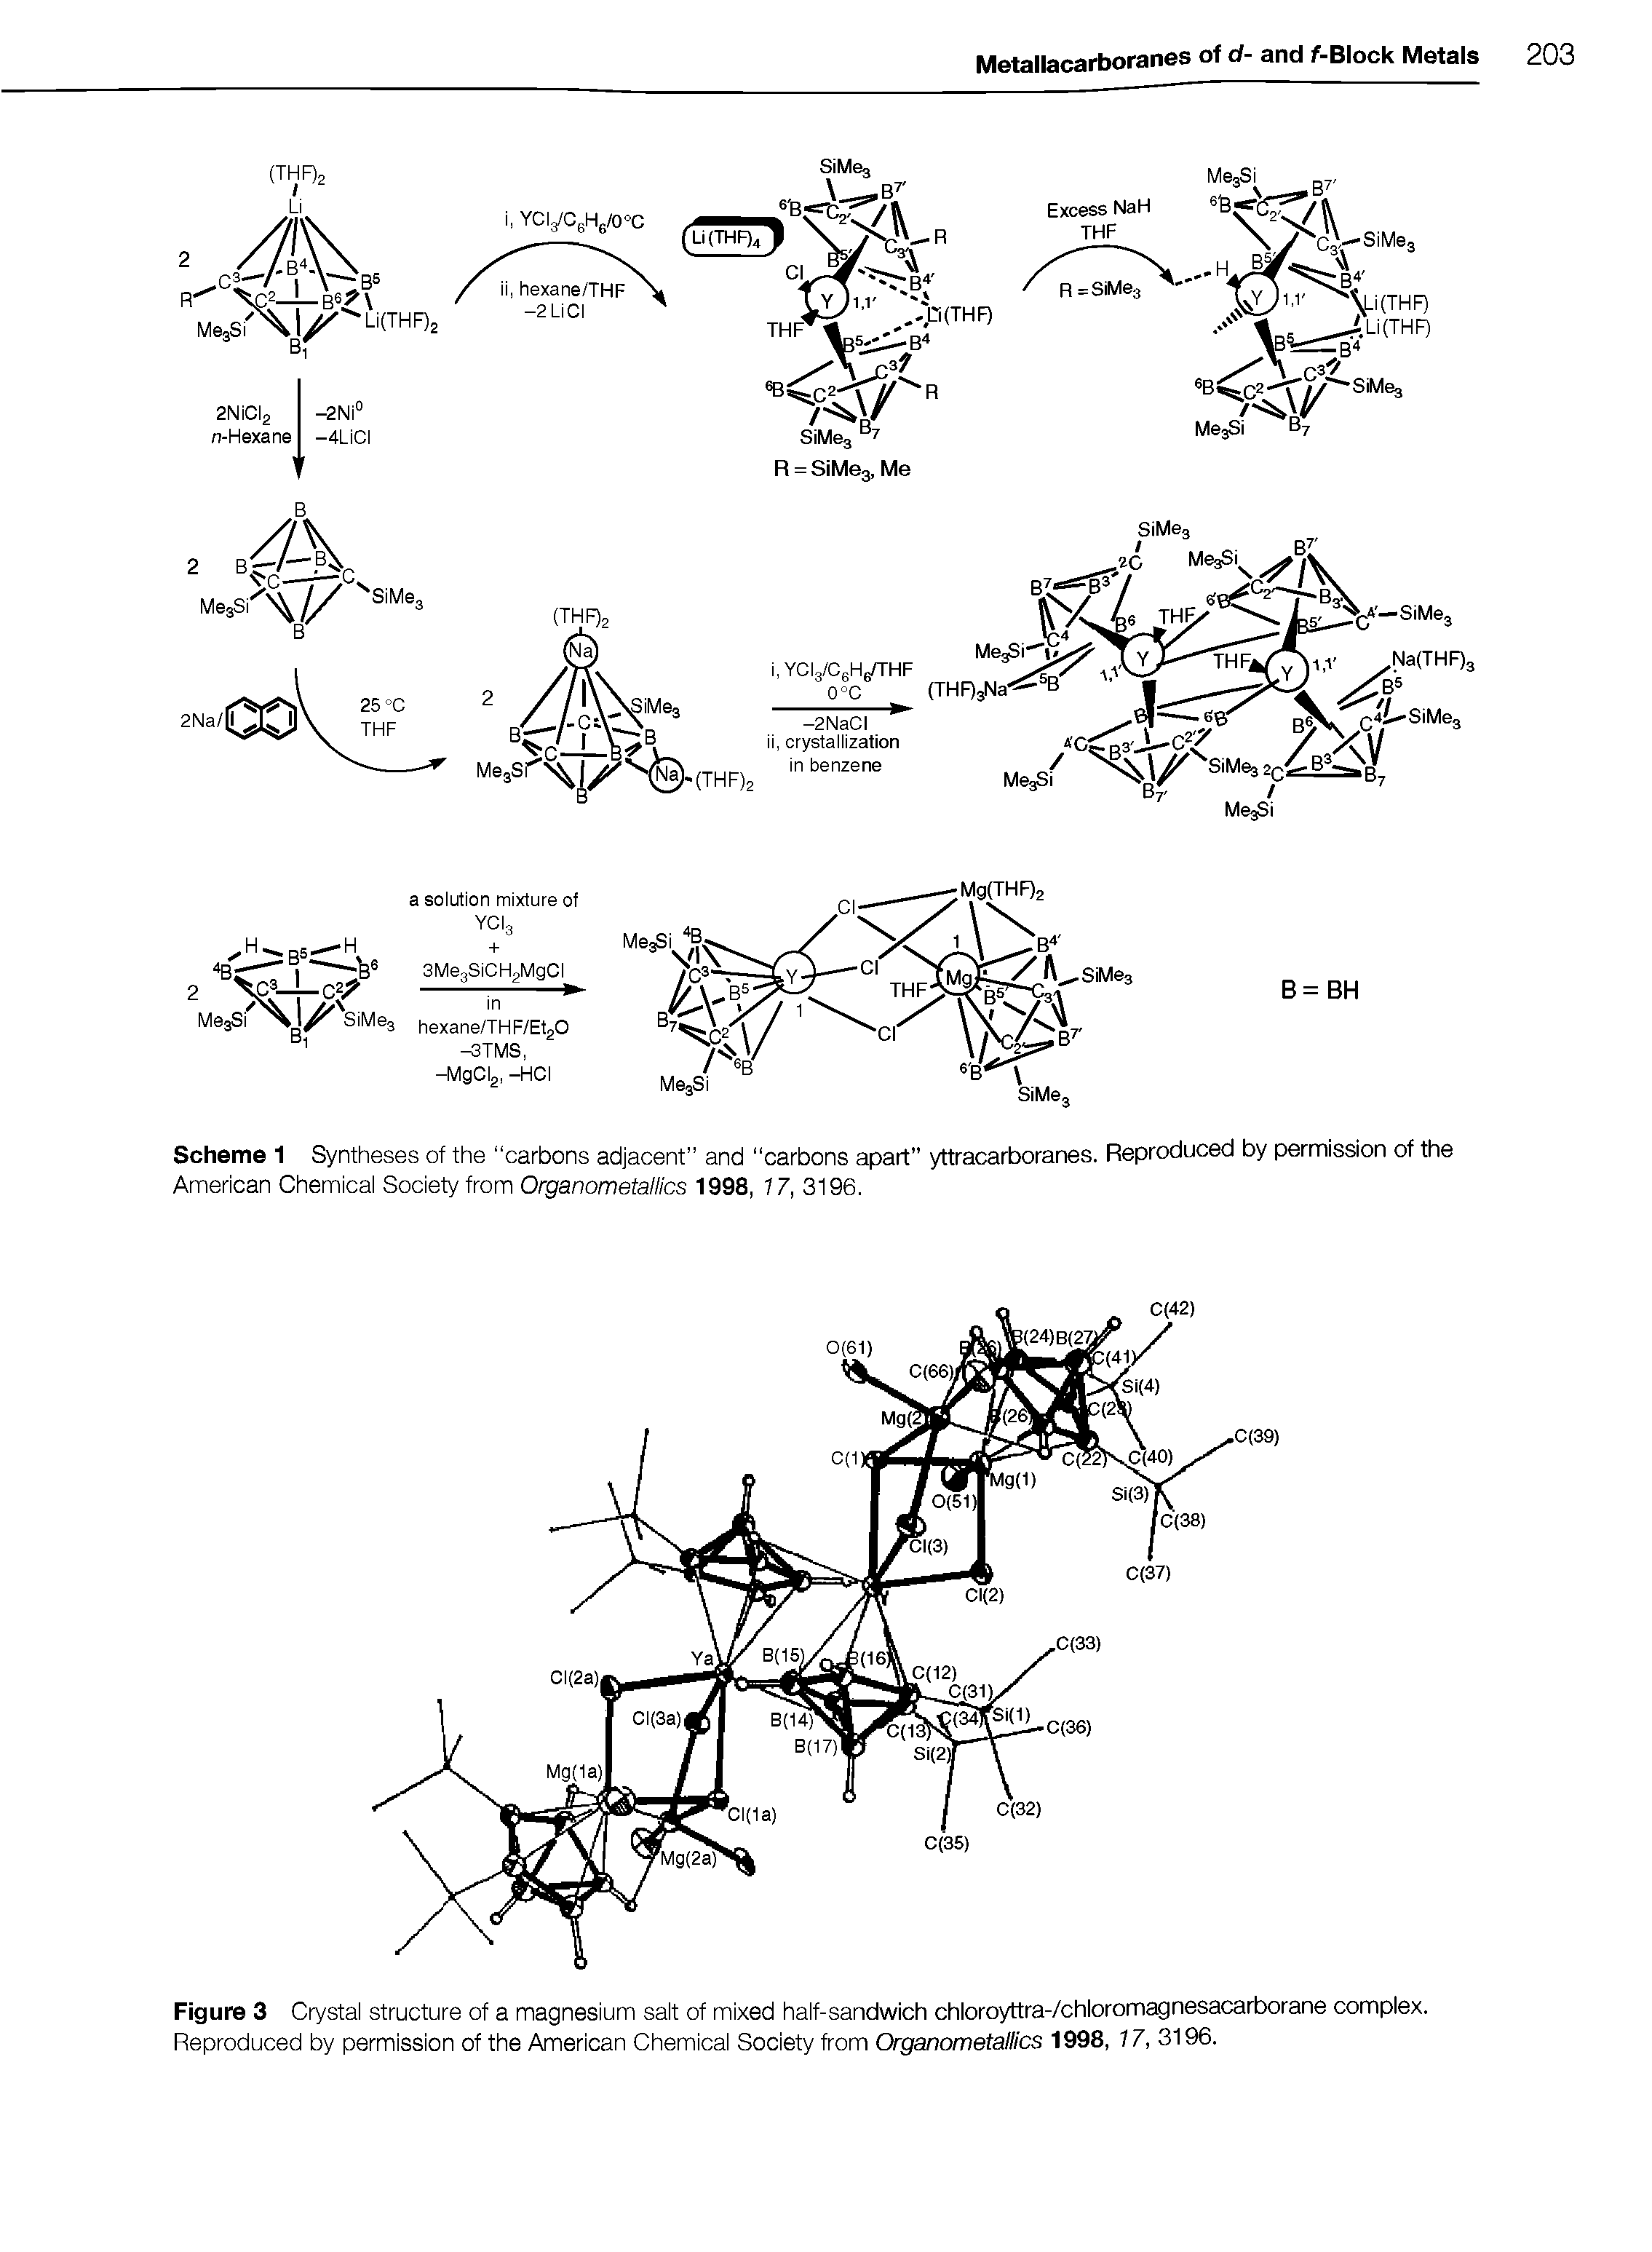 Figure 3 Crystal structure of a magnesium salt of mixed half-sandwich chloroyttraVchloromagnesacarborane complex. Reproduced by permission of the American Chemical Society from Organometallics 1998, 17, 3196.